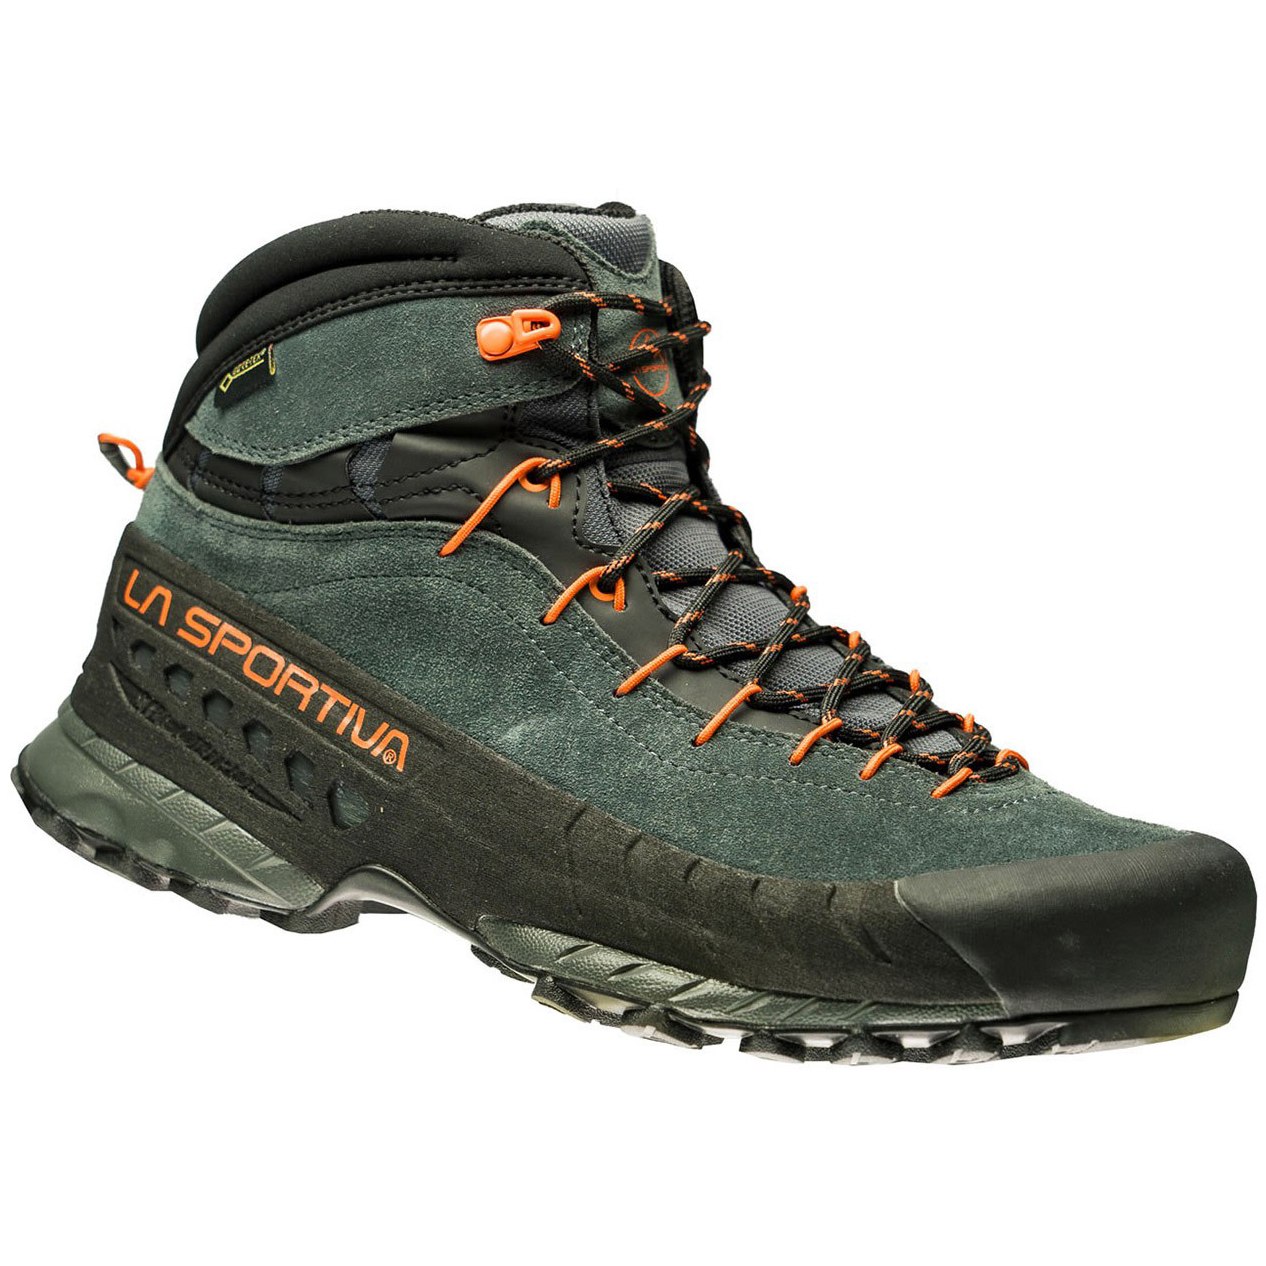 Picture of La Sportiva TX4 Mid GTX Approach Shoes - Carbon/Flame